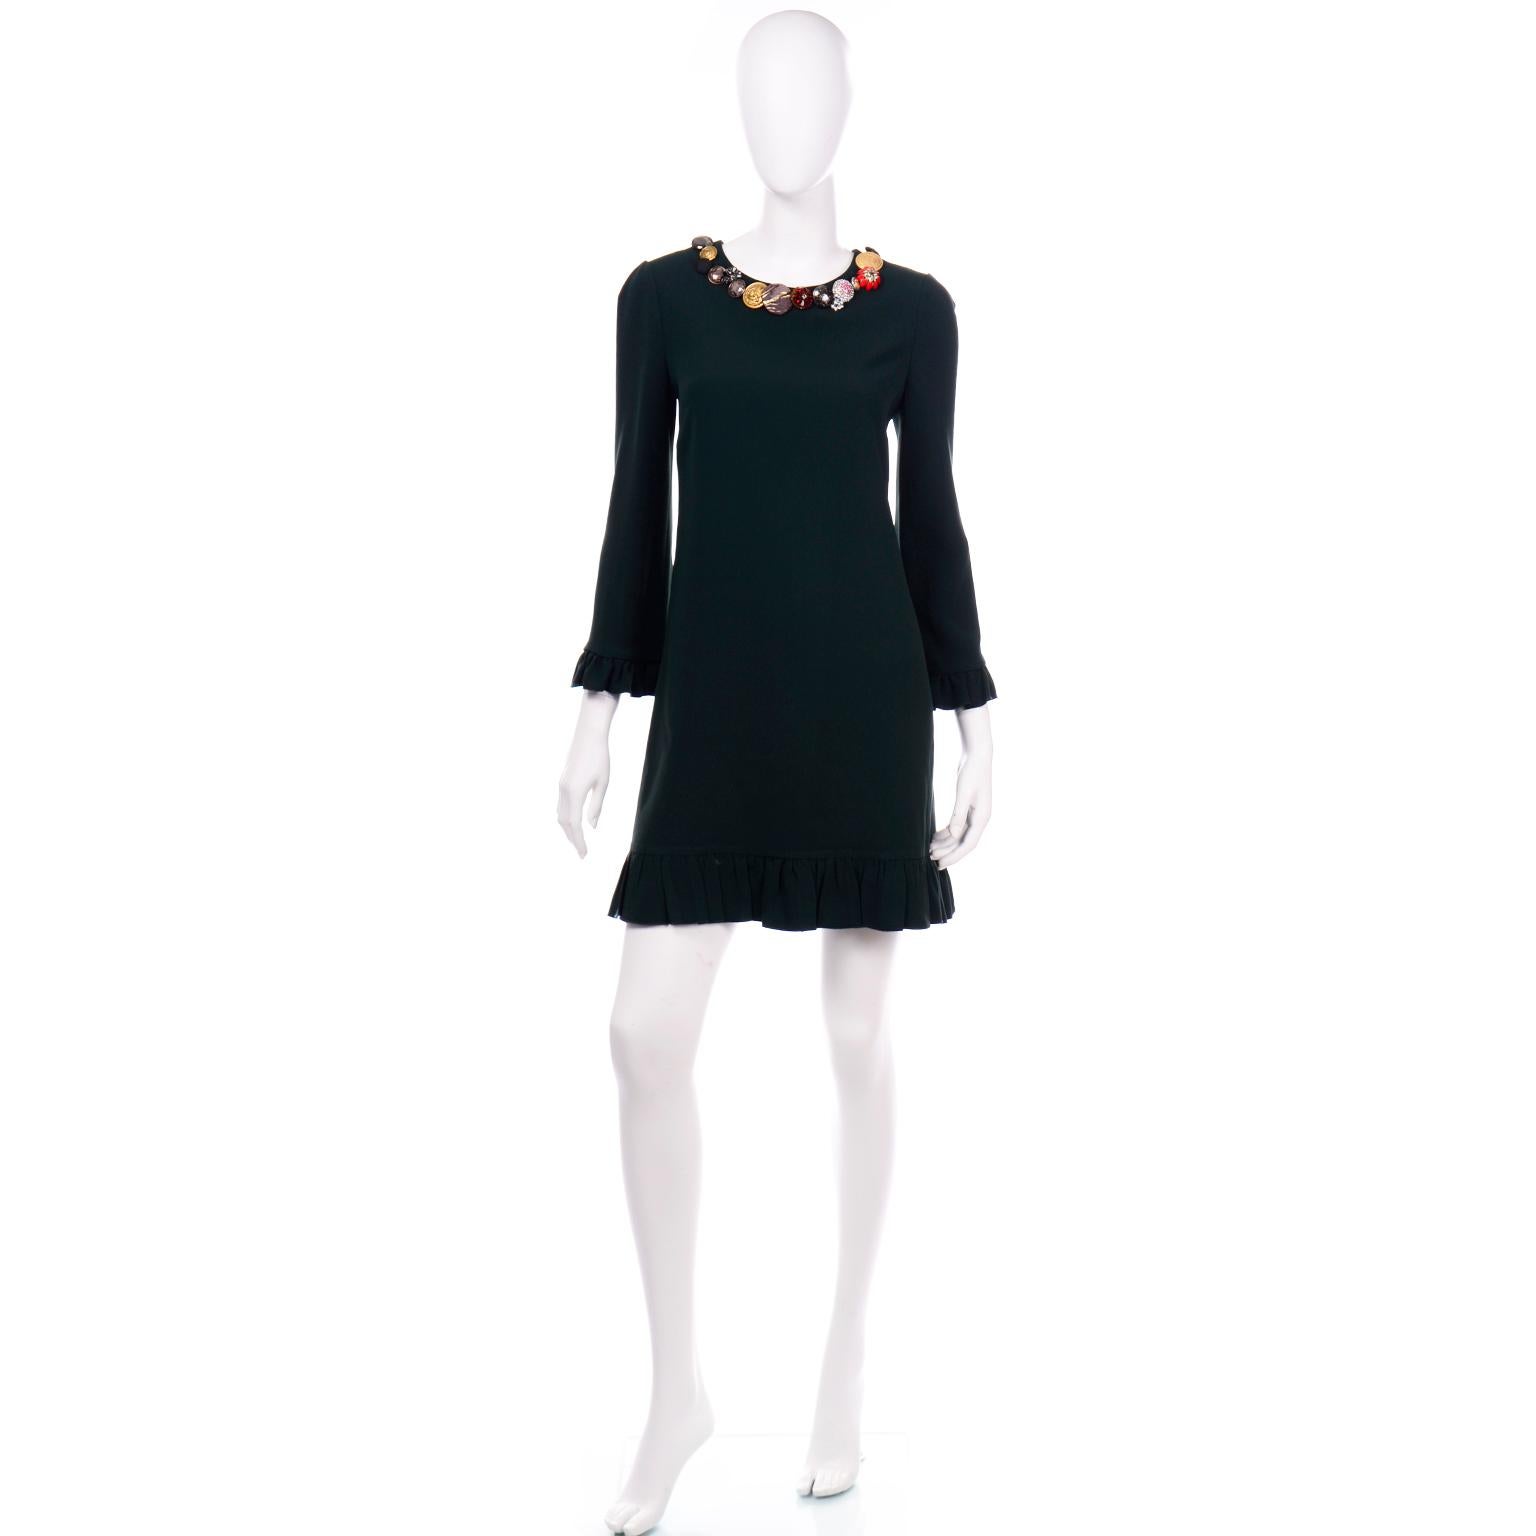 This Dolce & Gabbana dress is in a beautiful deep forest green with lovely ruffle trim on the 3/4 length sleeves and the hem. The collar of this dress is why we fell in love with it! It is embellished with assorted buttons (including some Dolce &